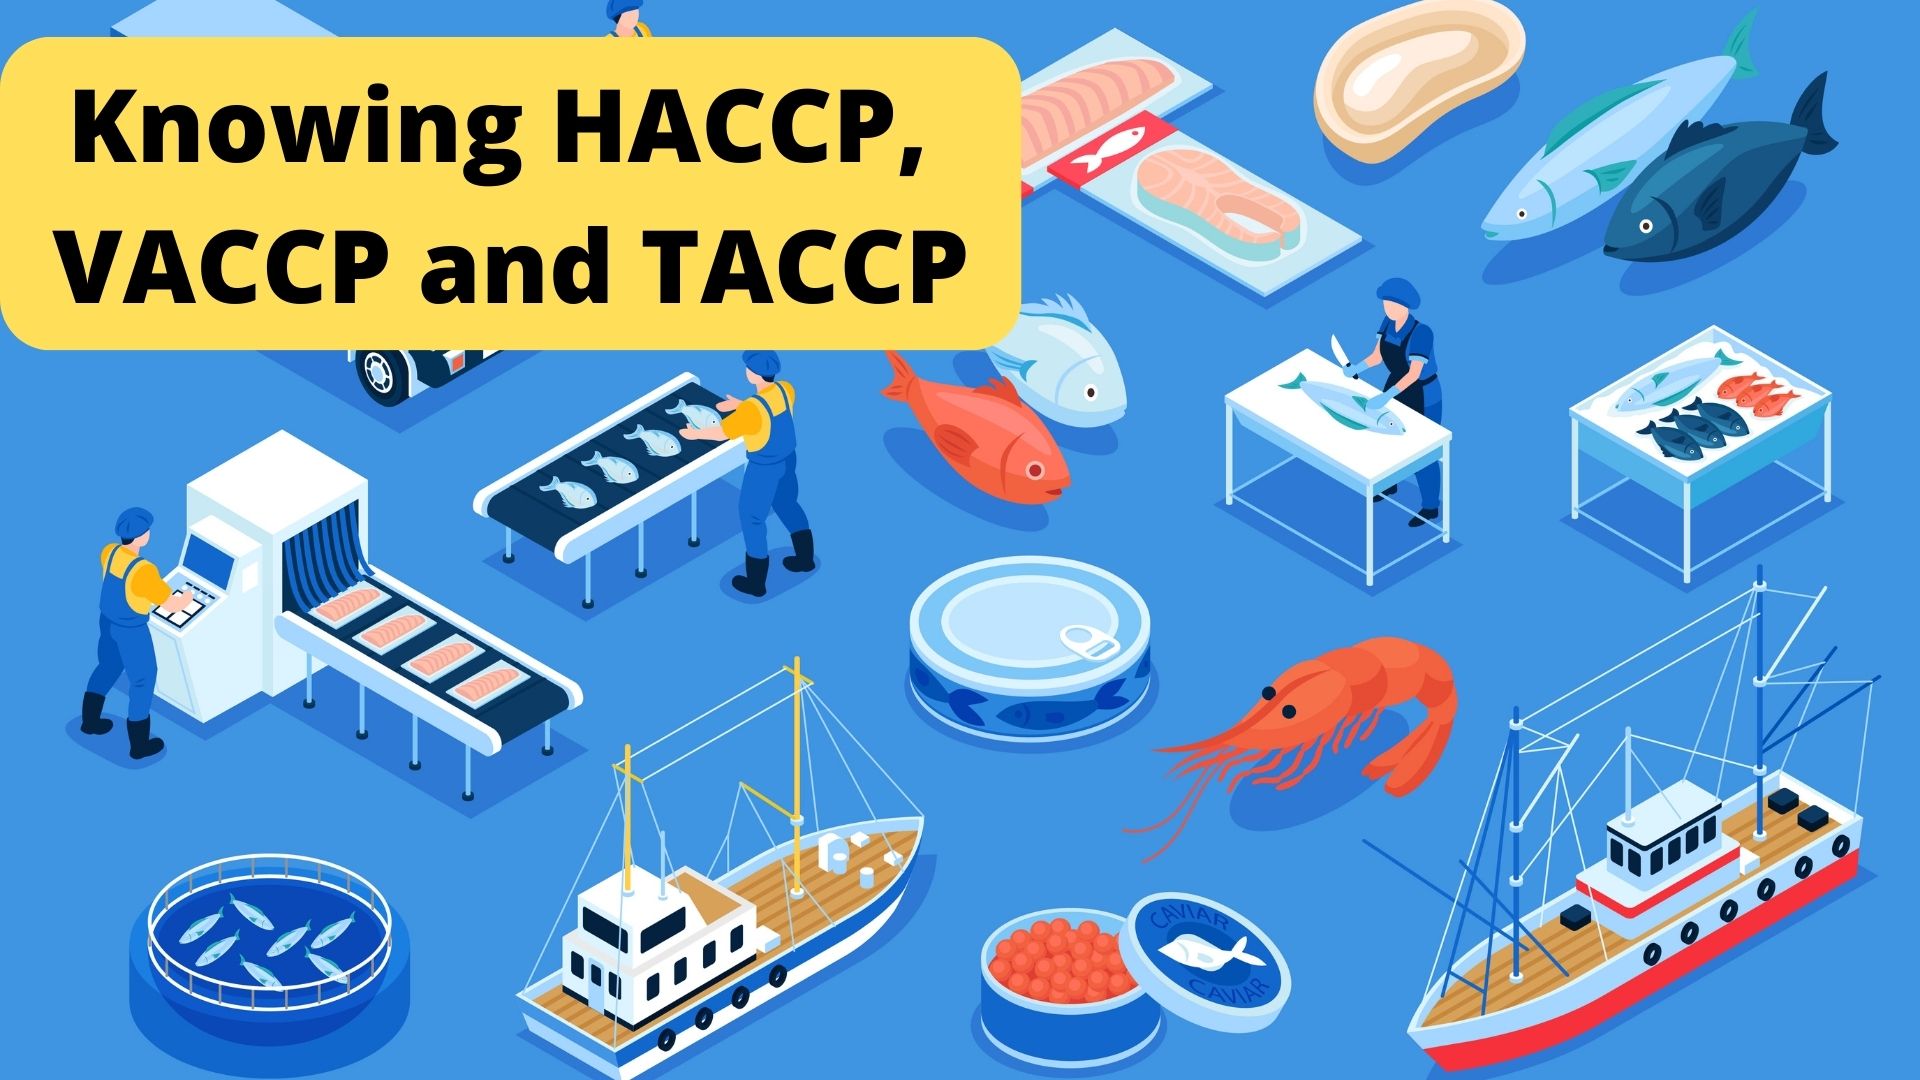 Knowing HACCP, VACCP and TACCP